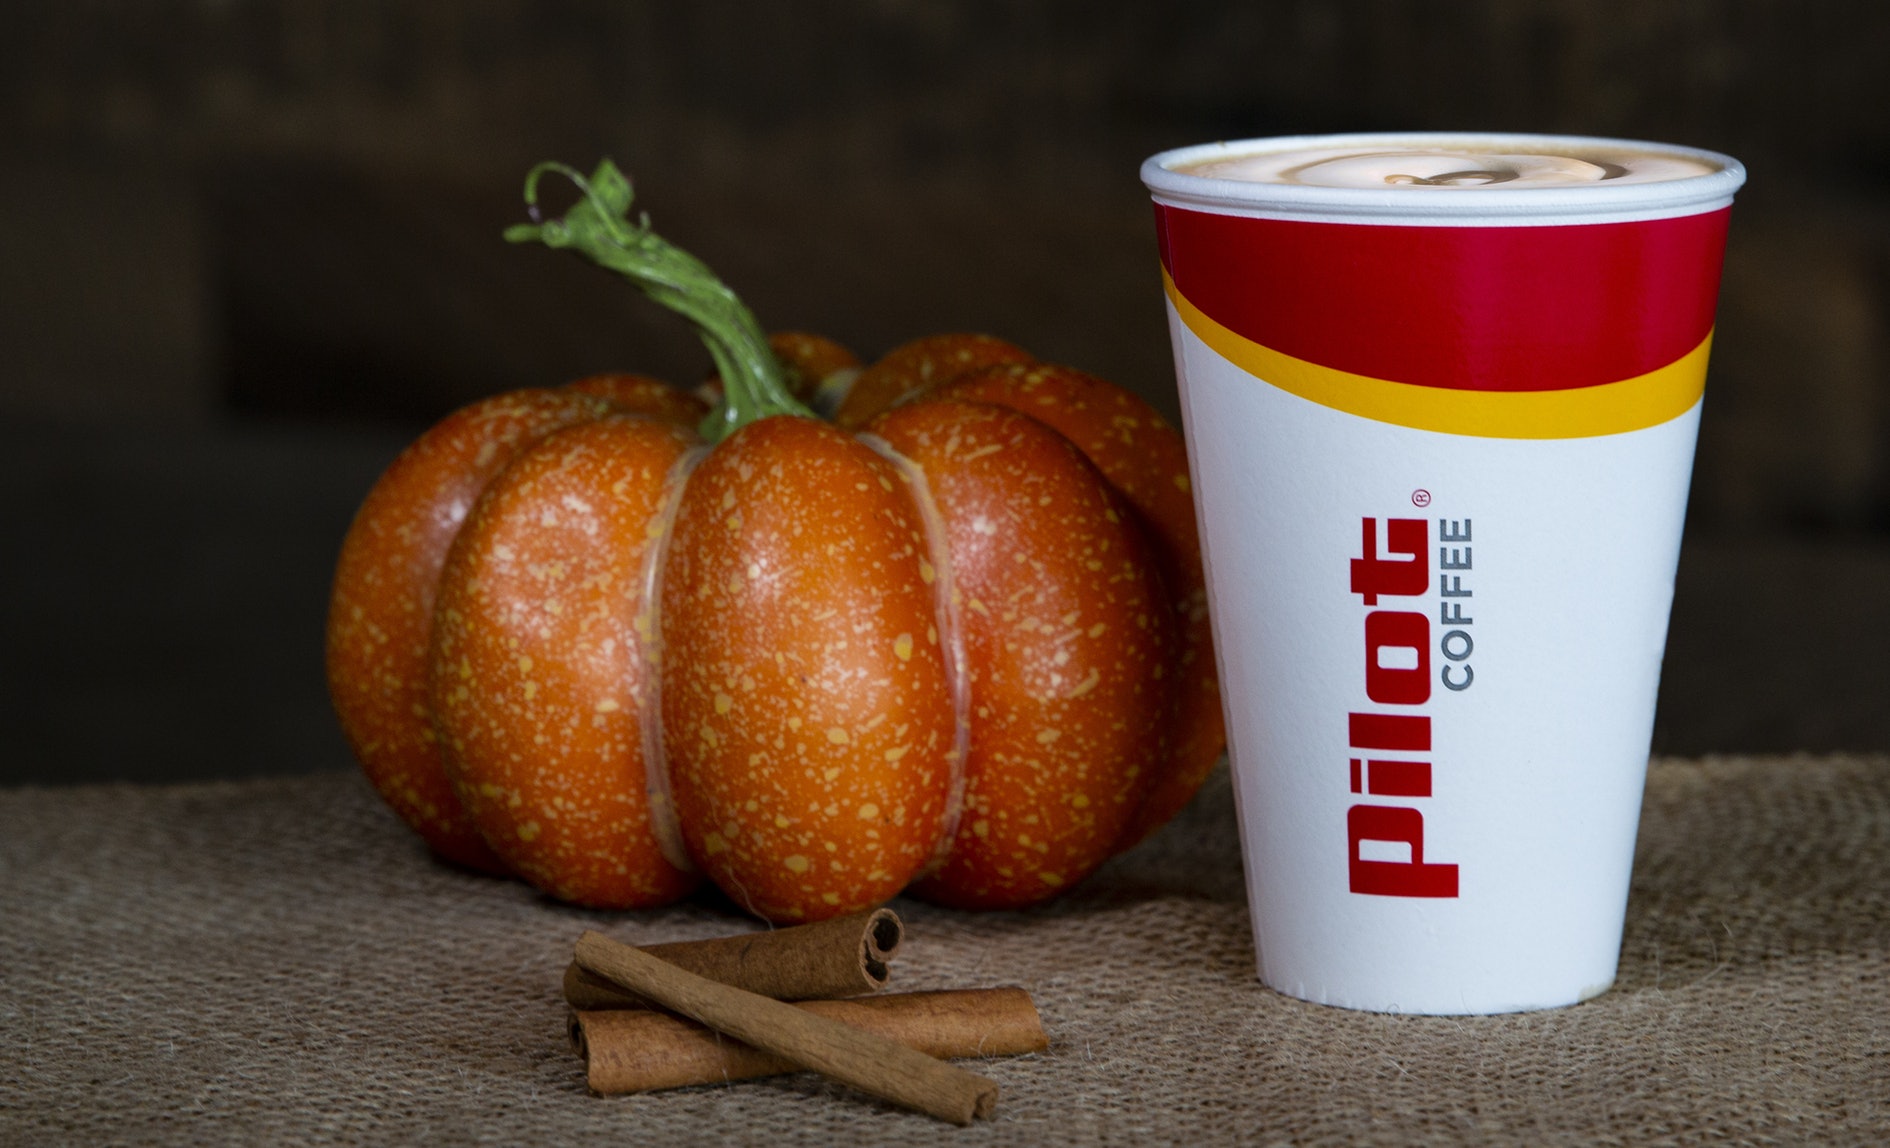 Score free coffee for national coffee day, september 2018 – Pilot Flying J coffee